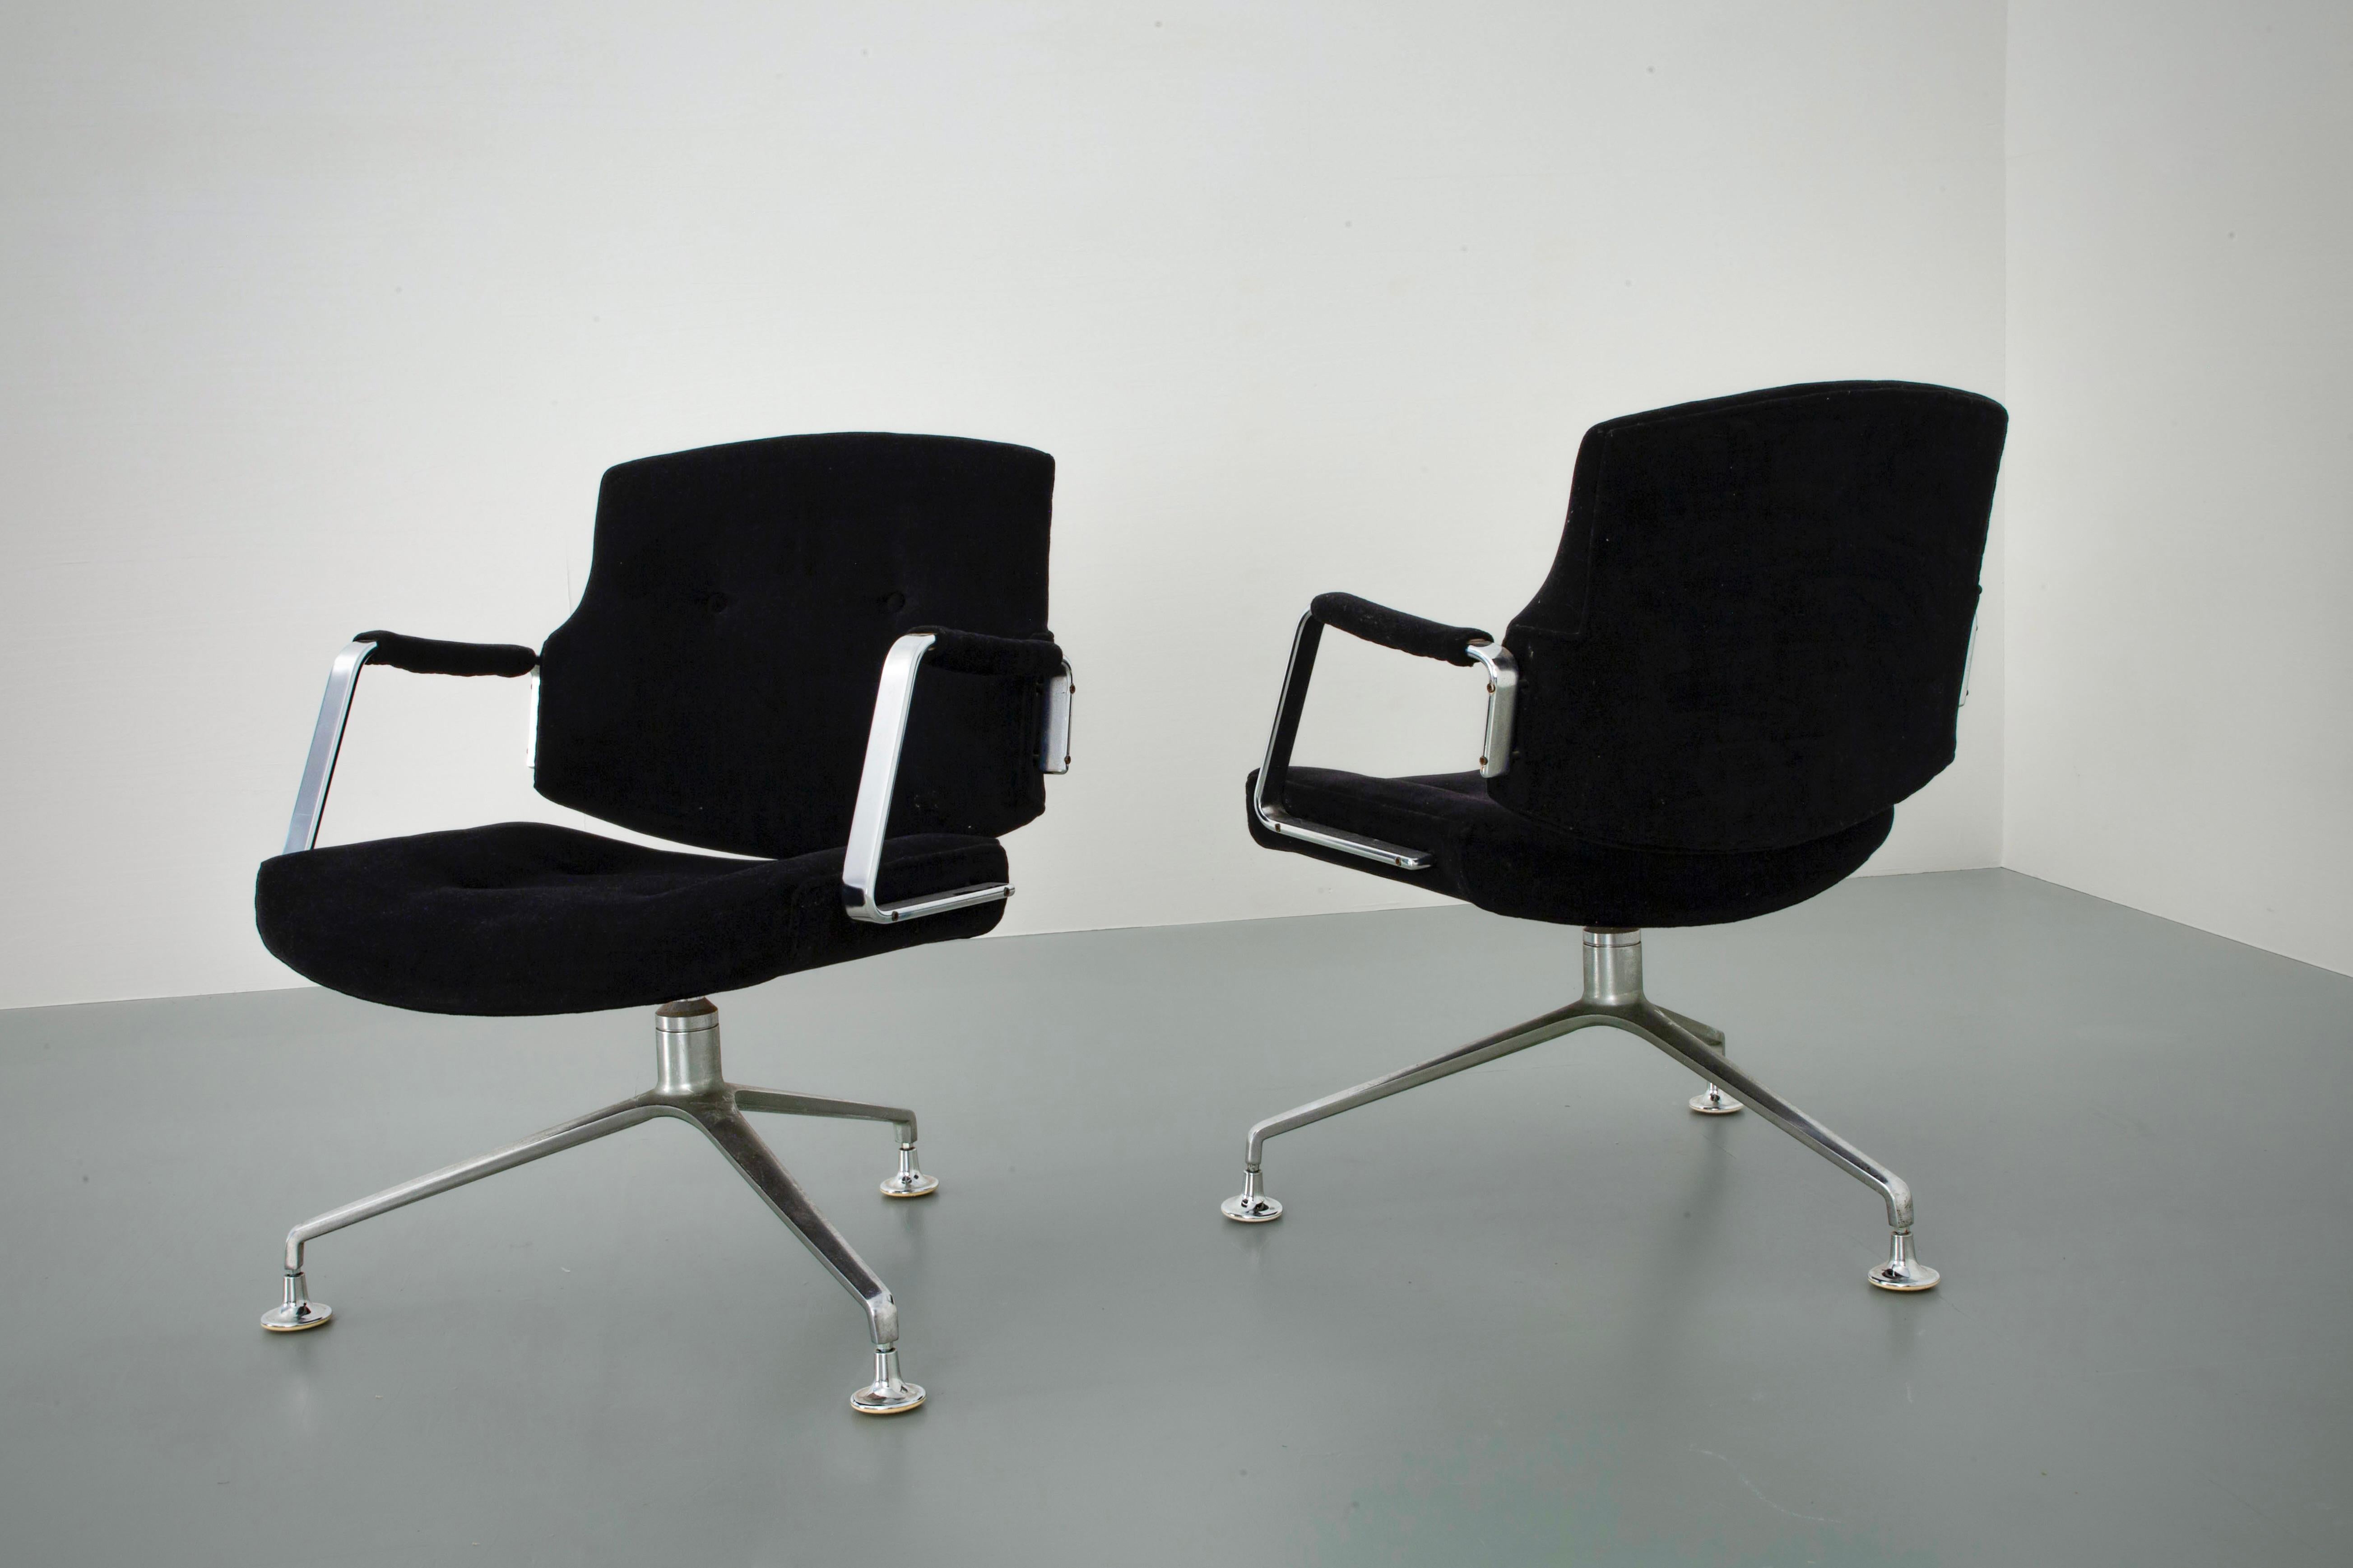 Set of 4 FK 84 Armchairs by Fabricius and Kastholm for Kill Int., Denmark, 1962 For Sale 1